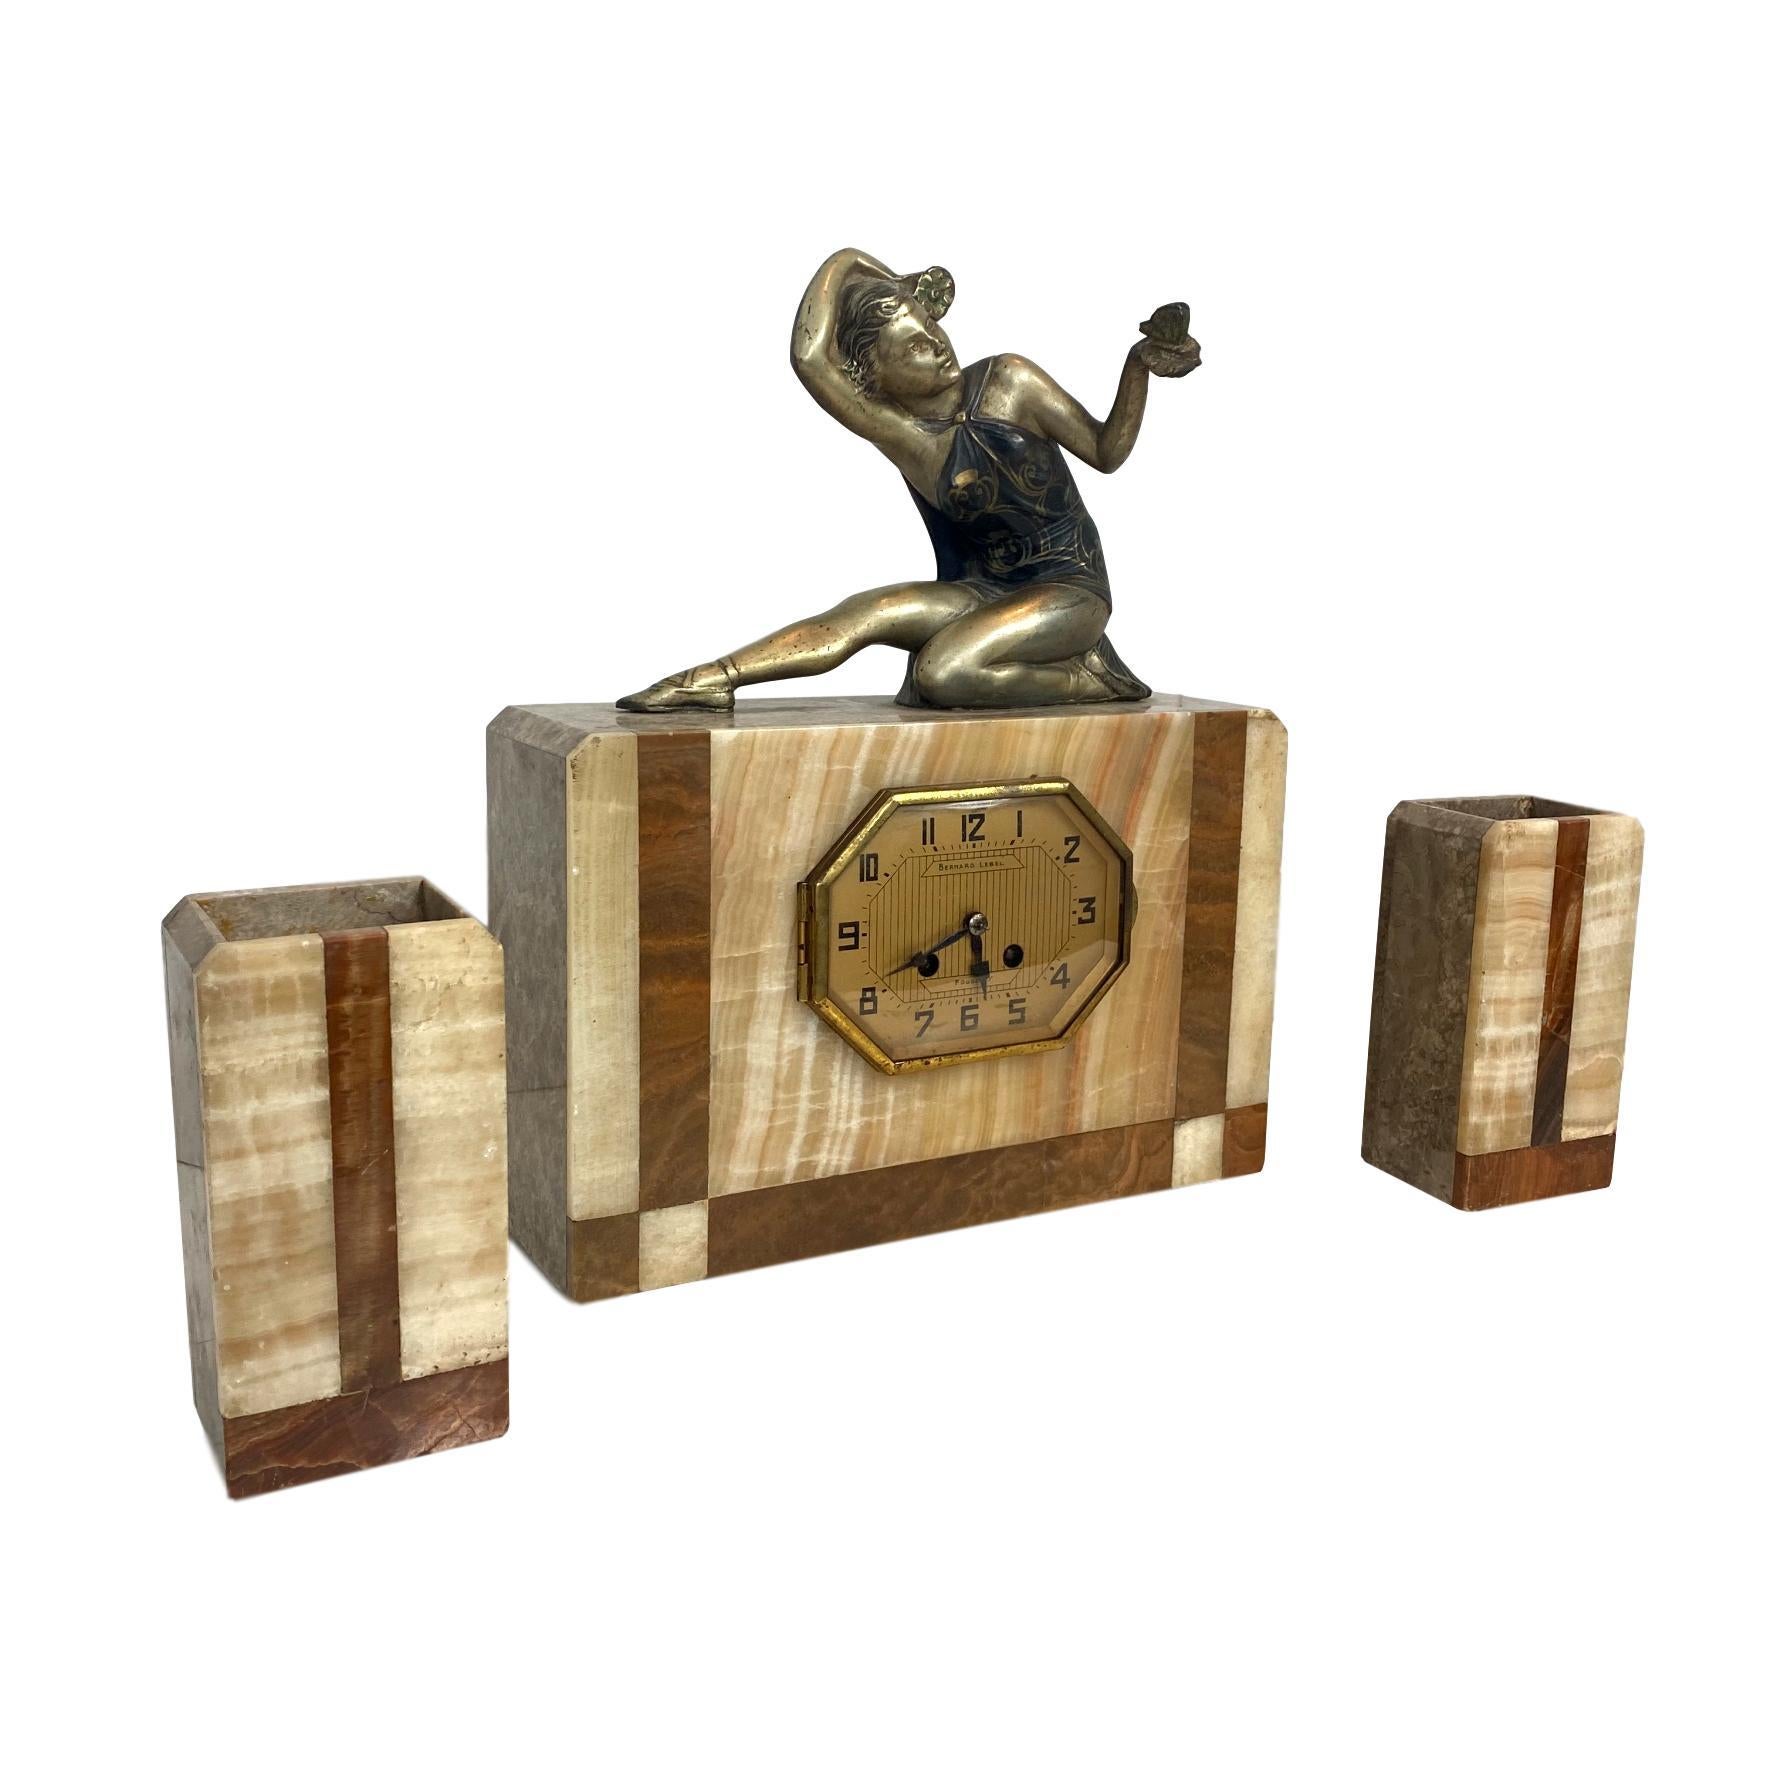 Art Deco marble clock set with figure of a lady, signed Bernard Lebel, French, circa 1930s.